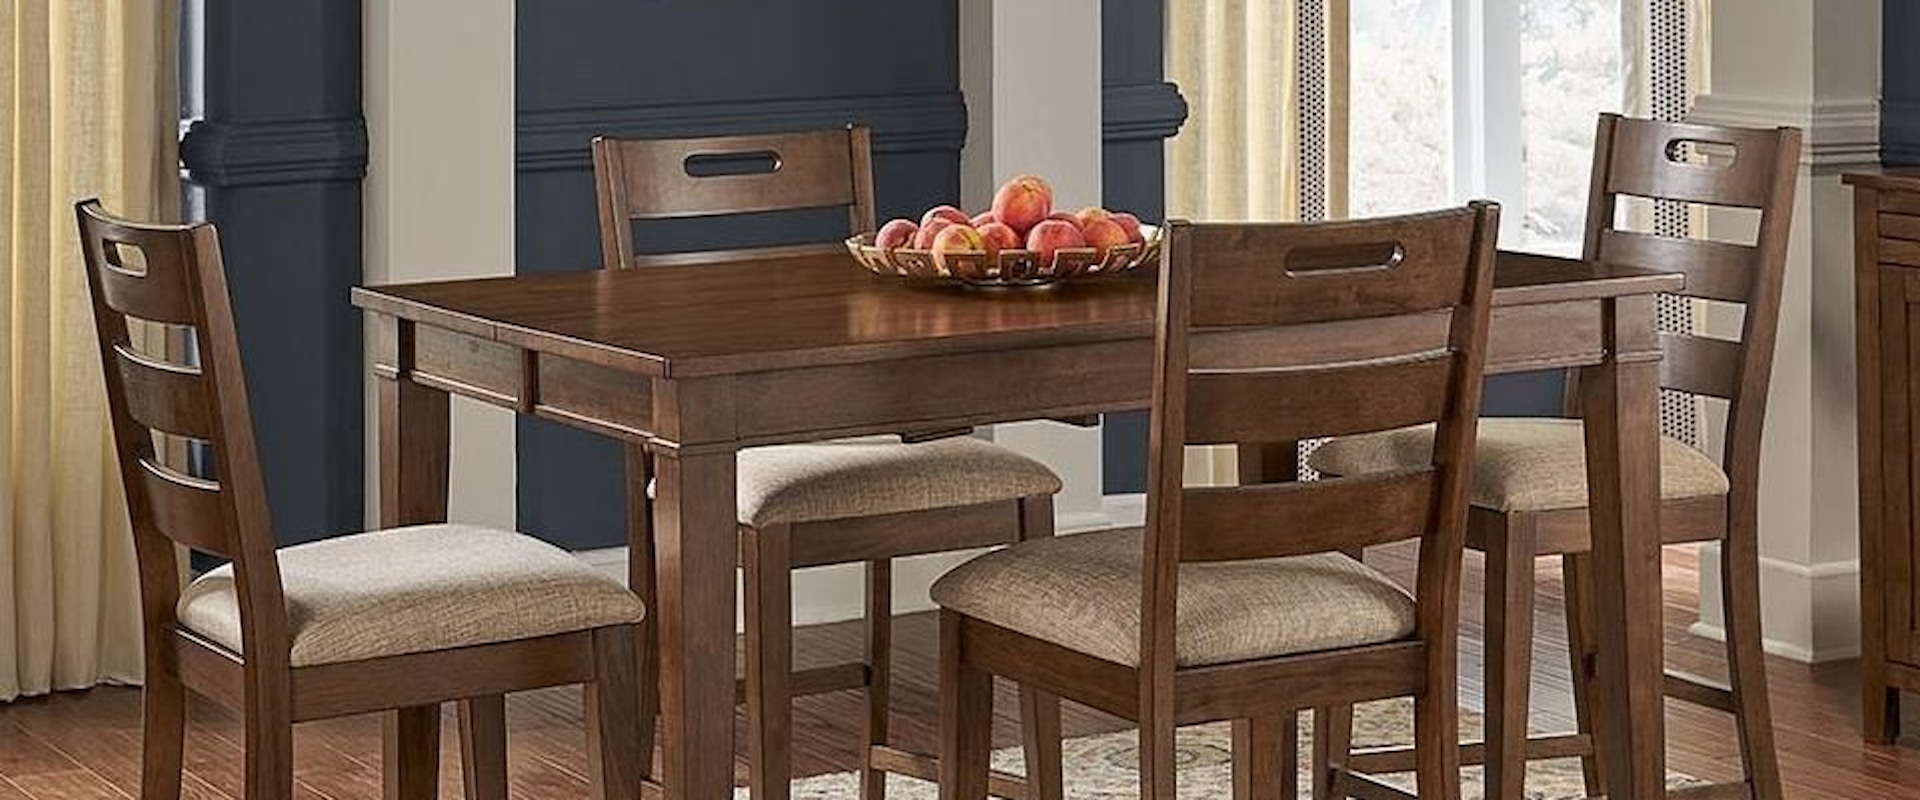 Transitional 5-Piece Counter Height Table and Stool Set